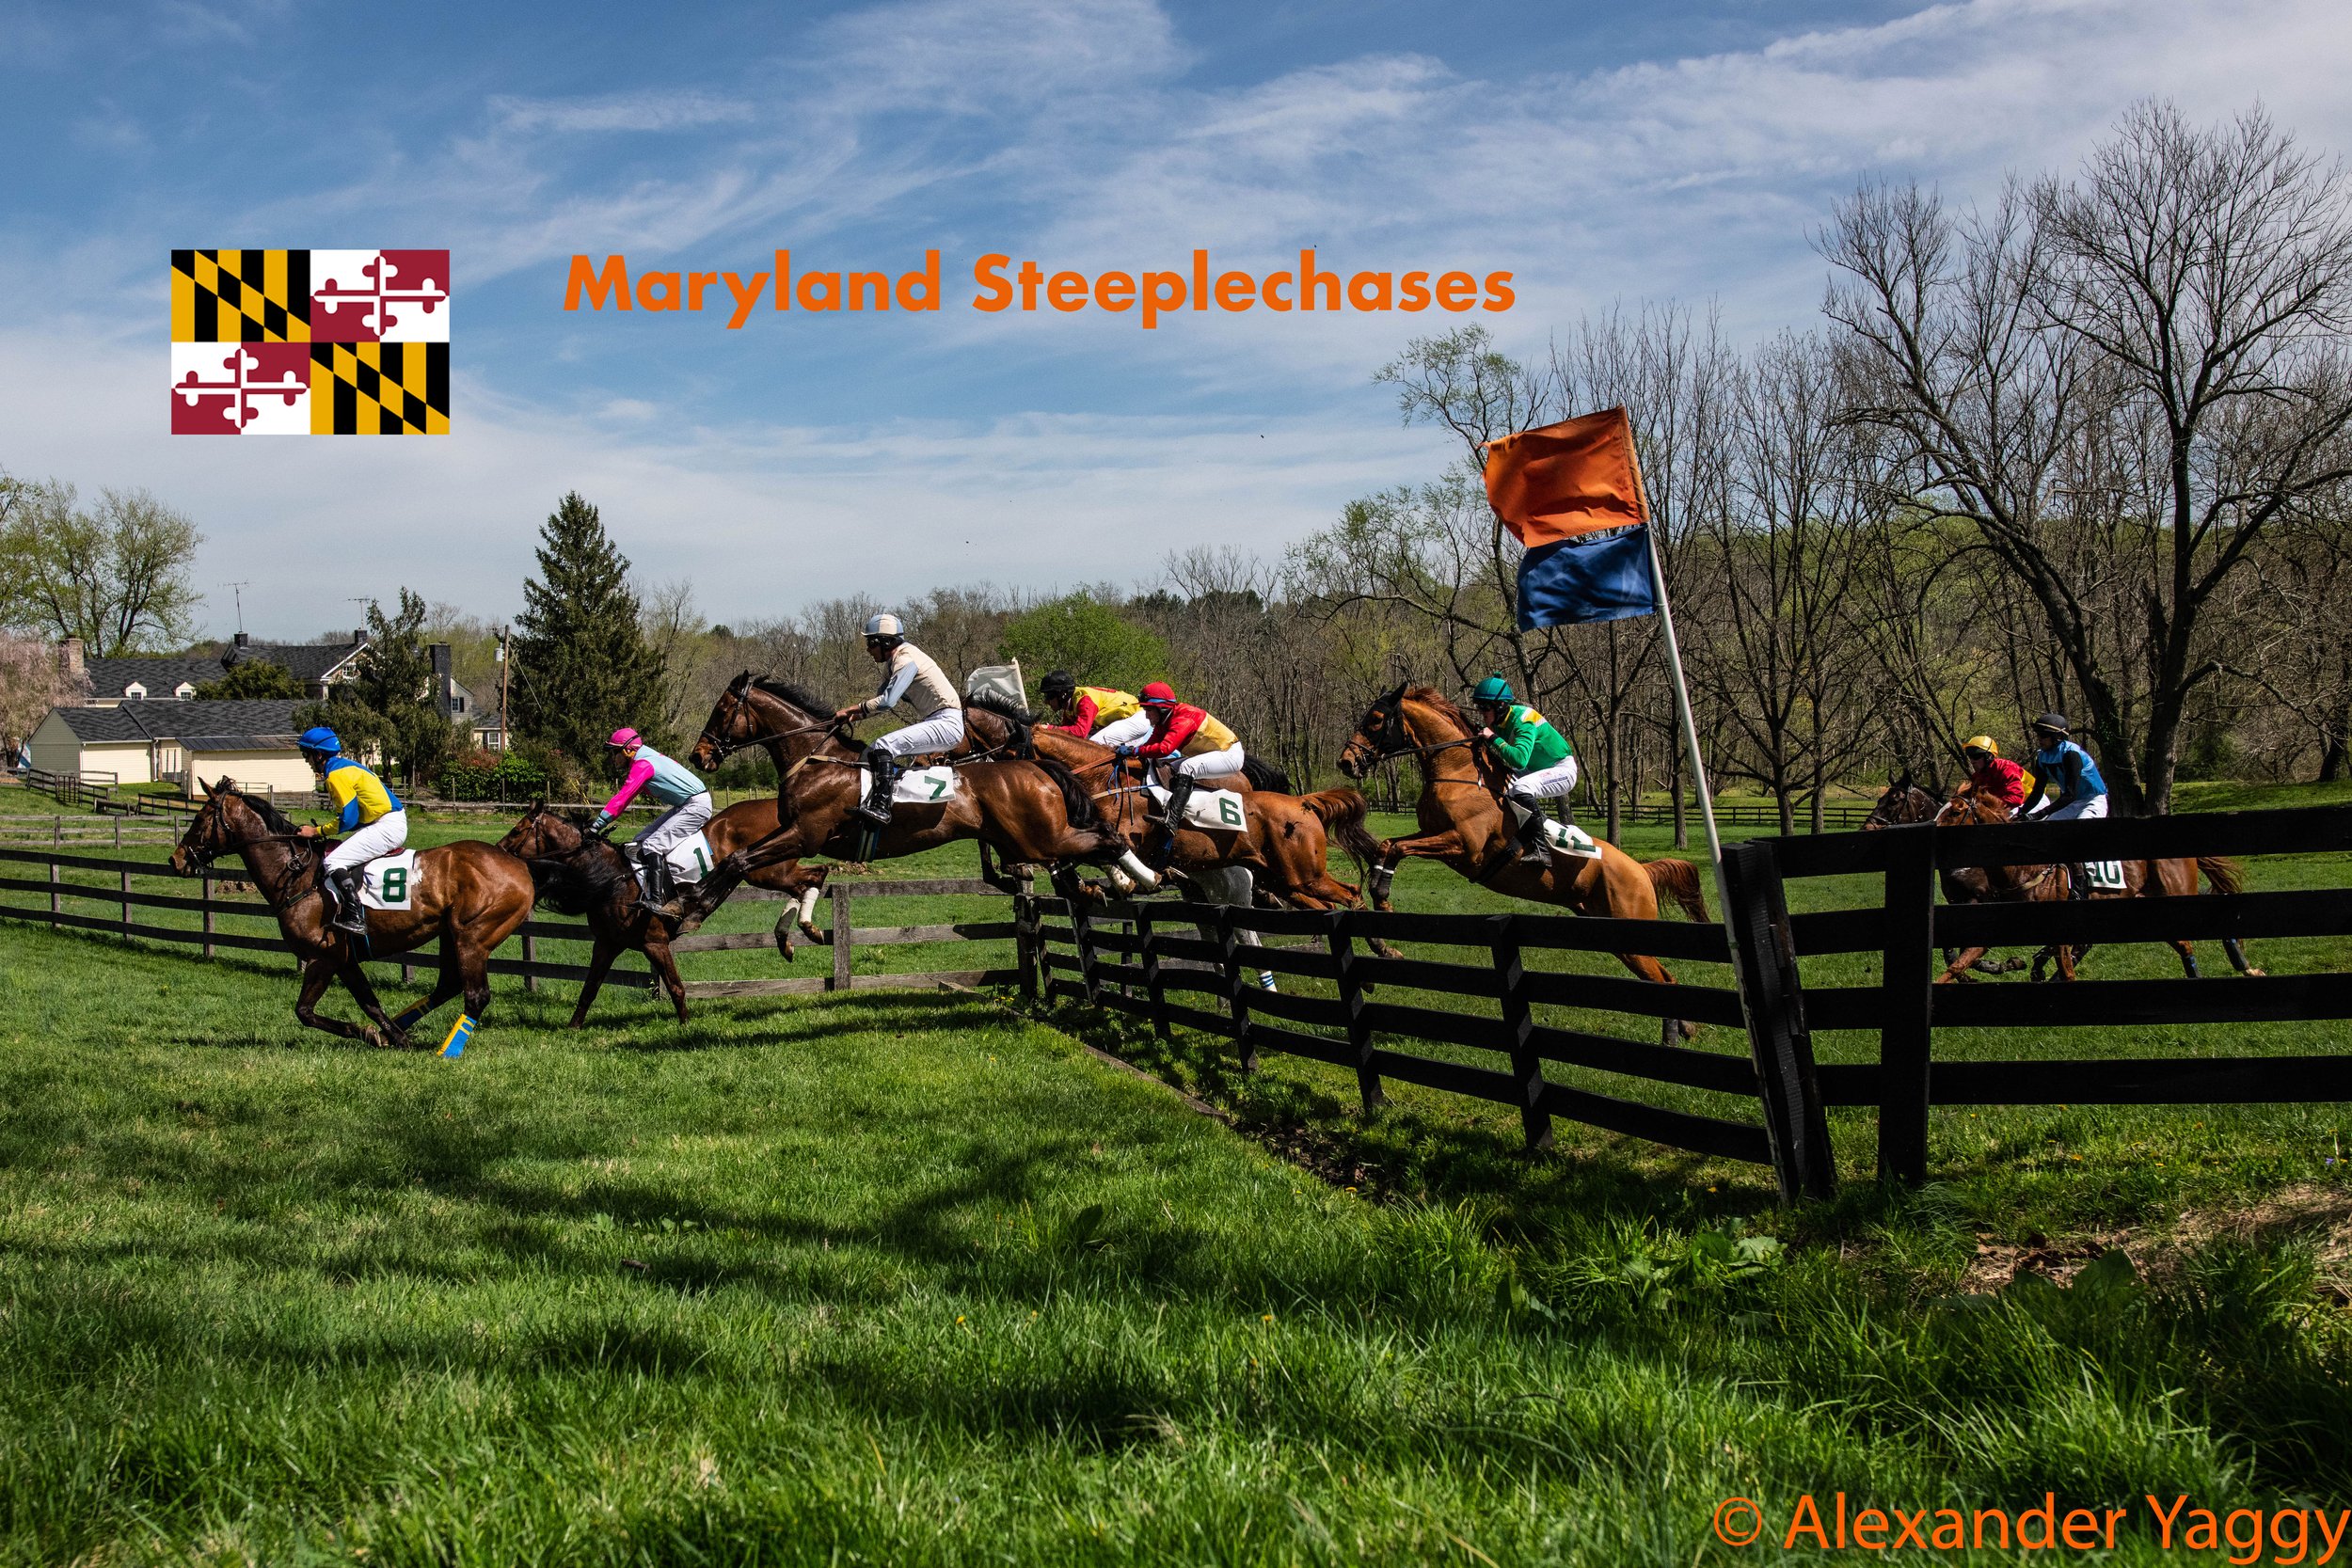 The 2019 Maryland Steeplechases Story